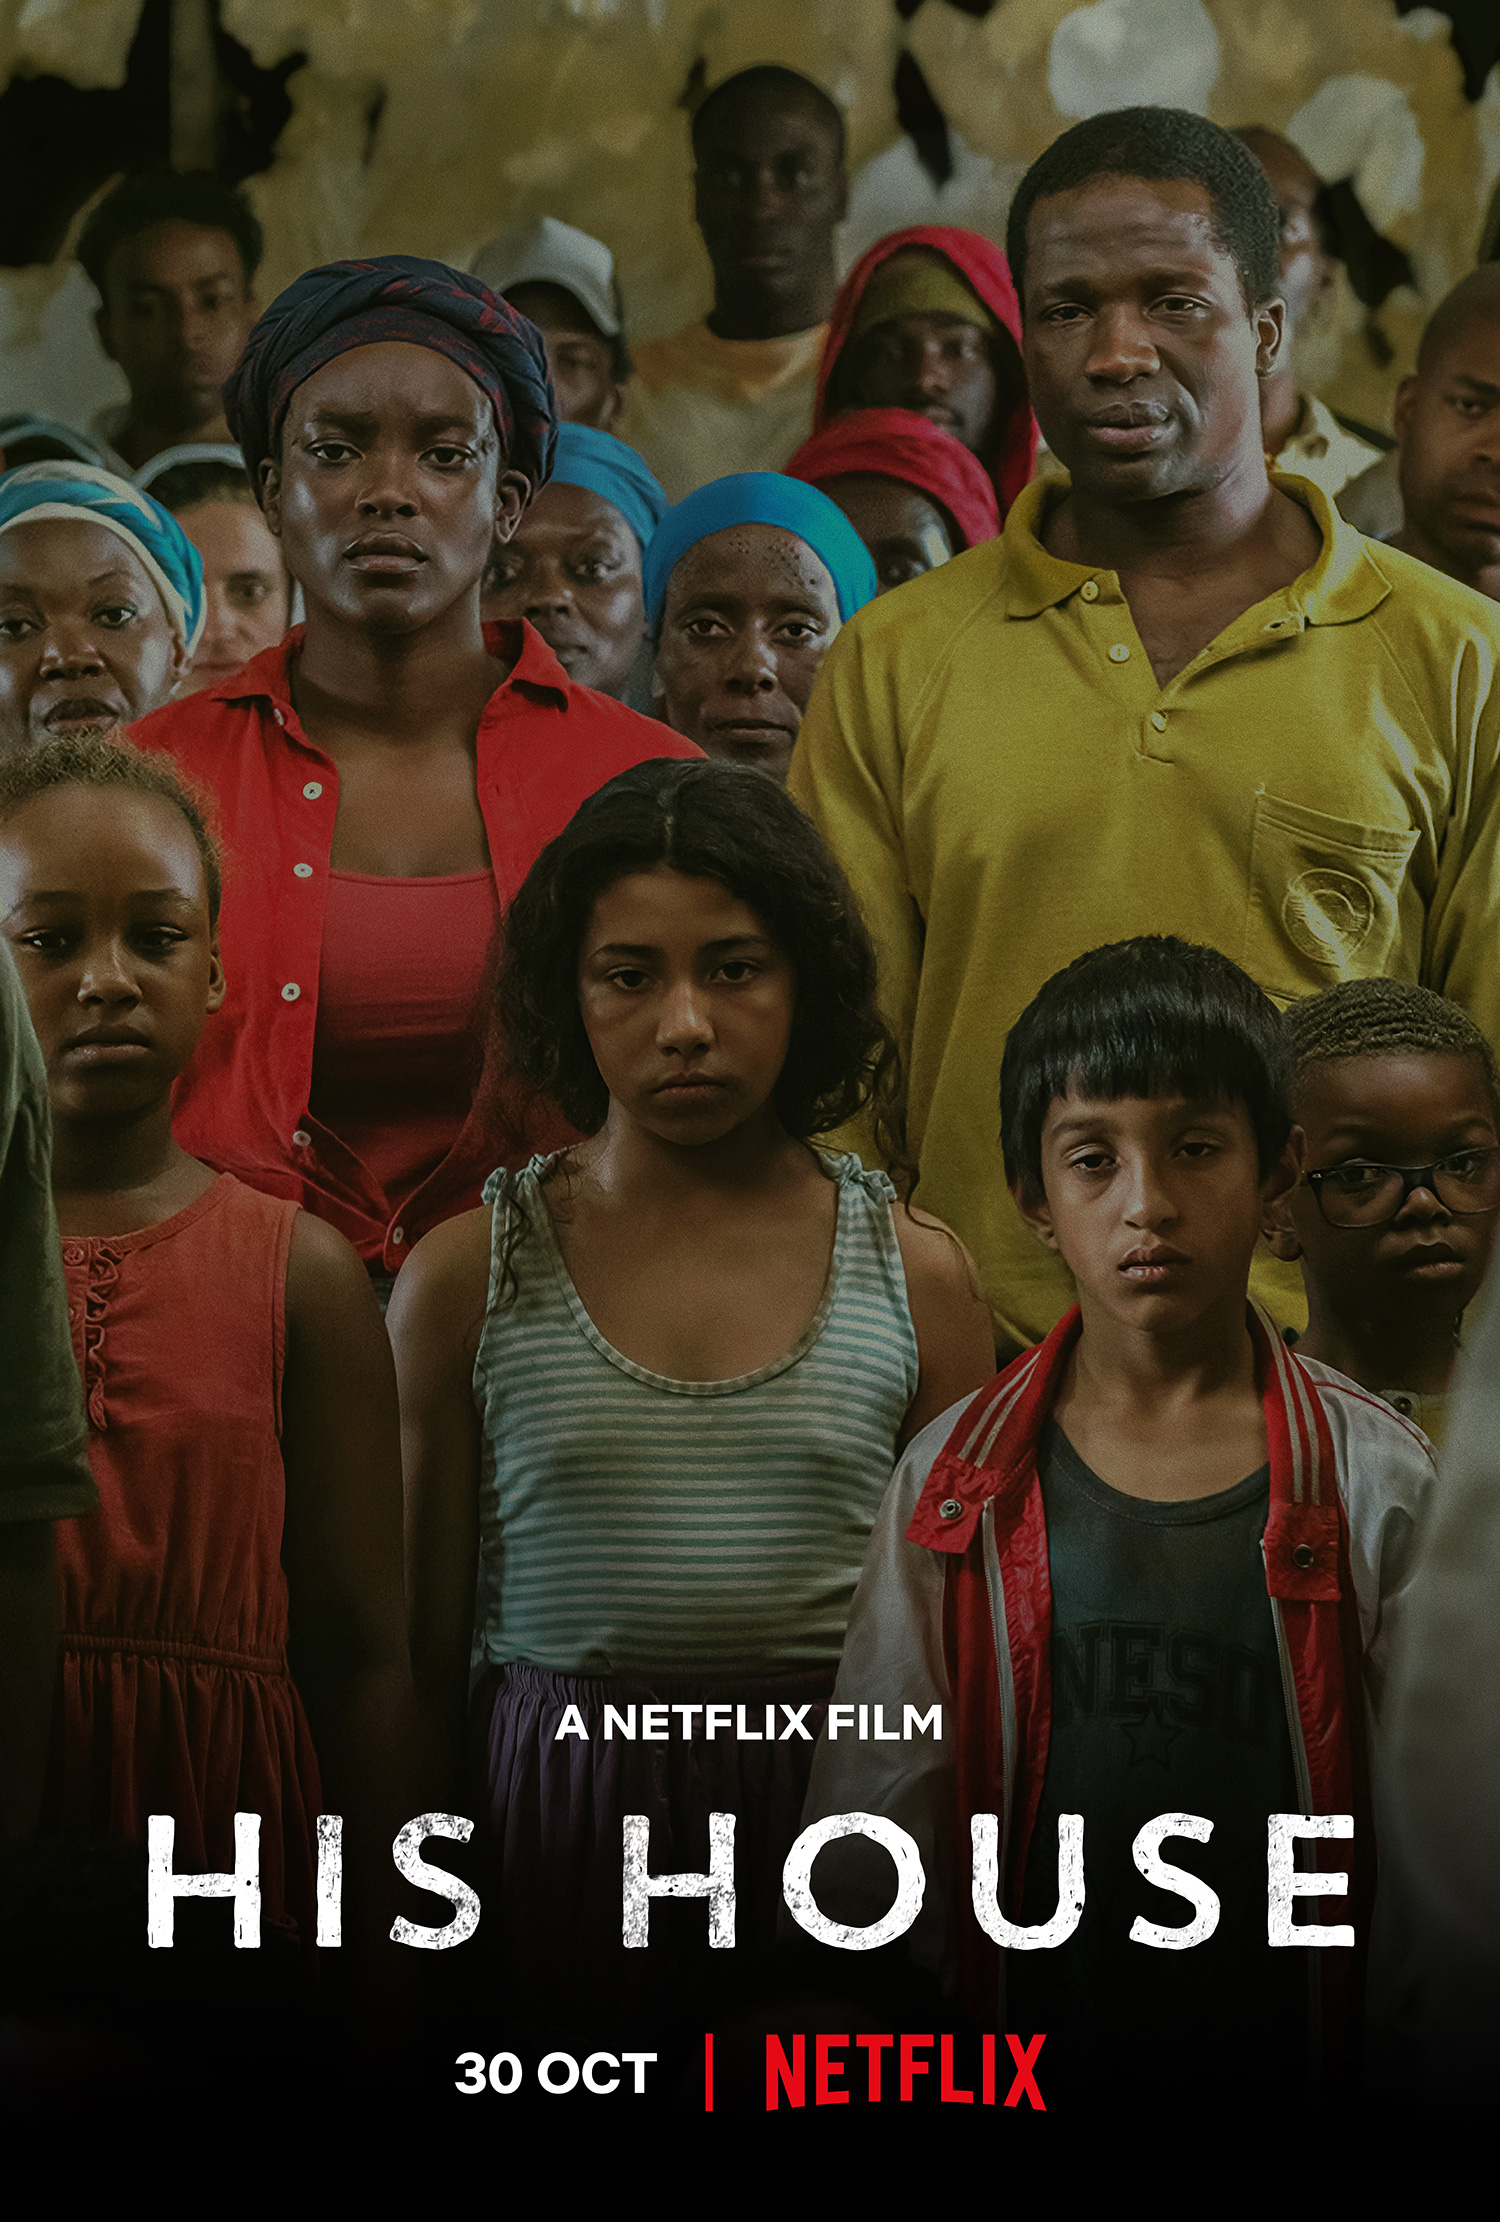 Poster for 'His House' showing various people of all ages